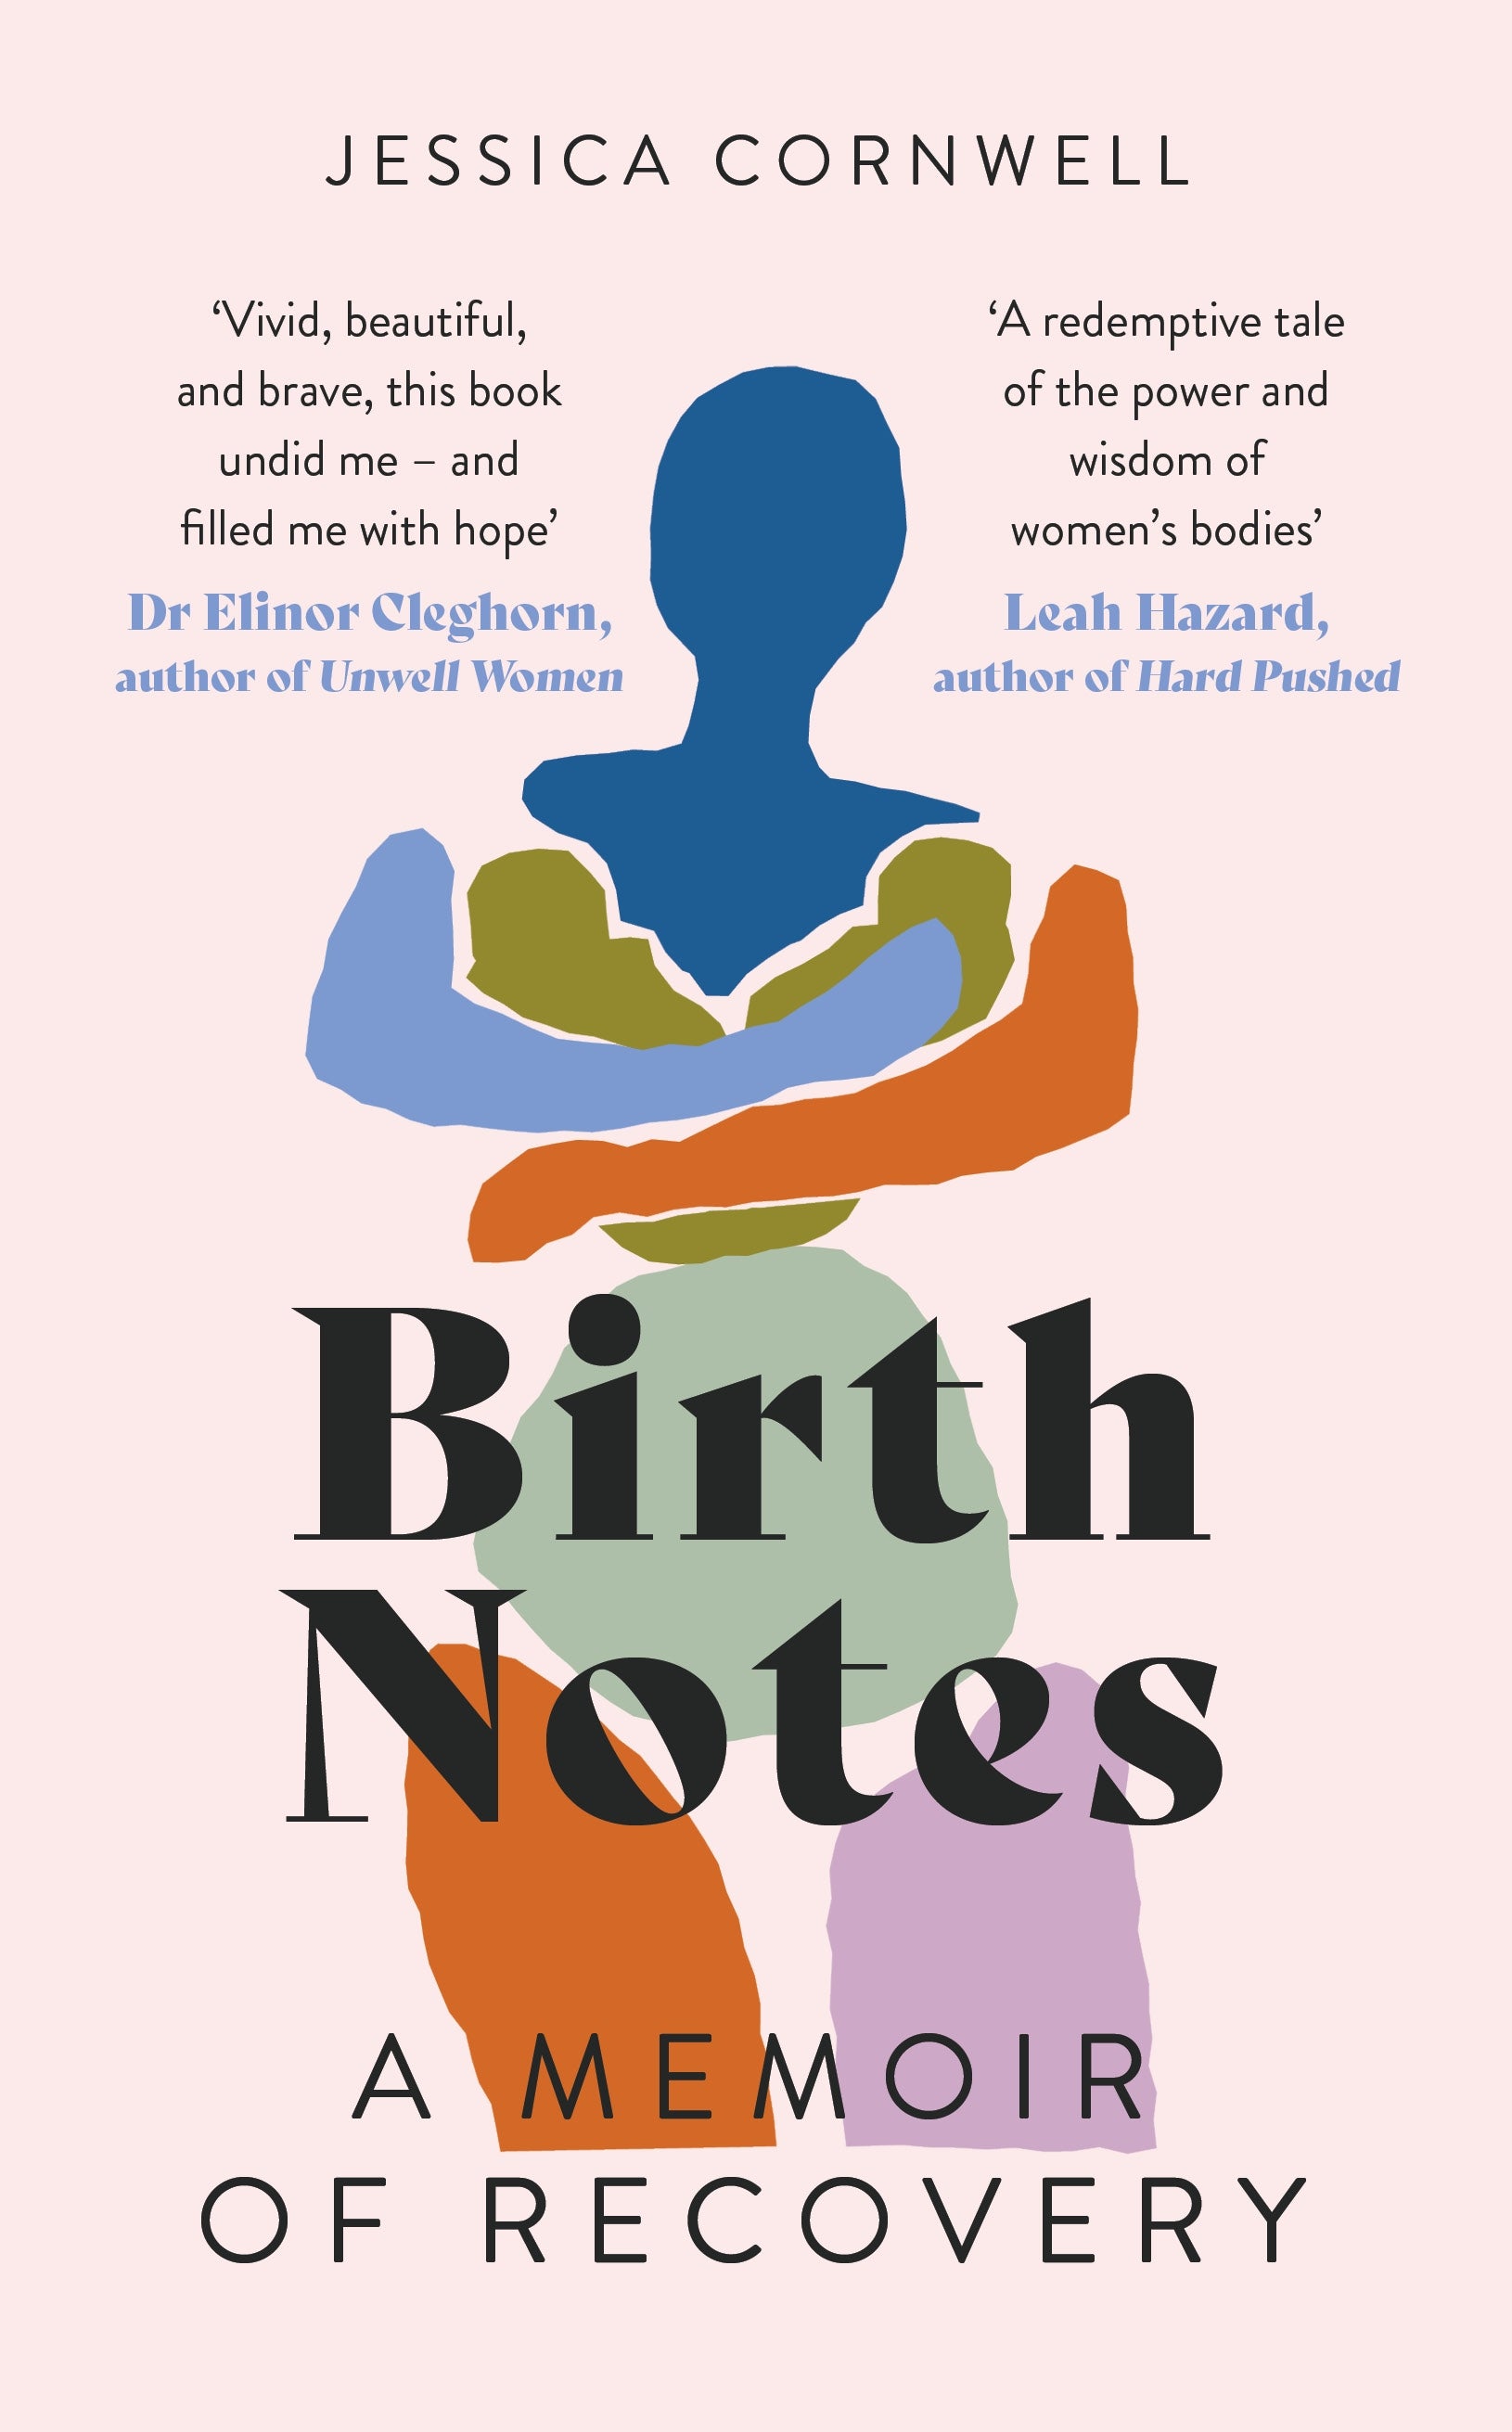 Birth Notes by Jessica Cornwell